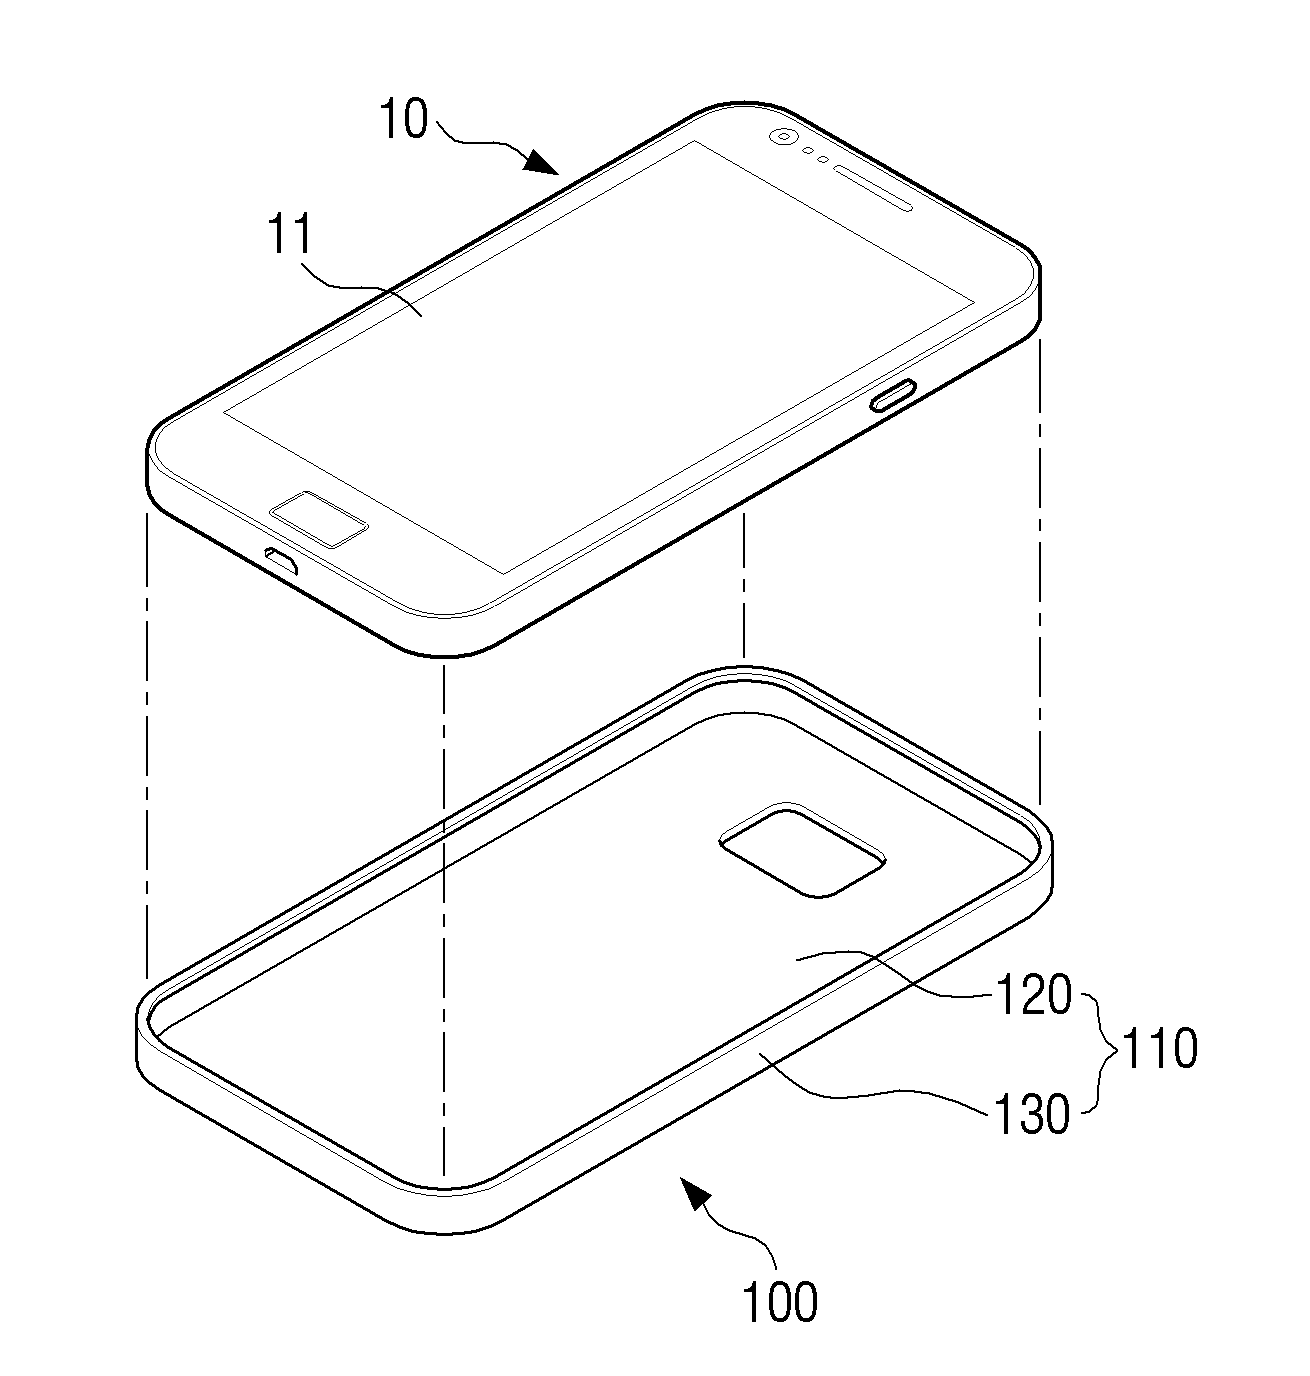 Protective case for mobile device